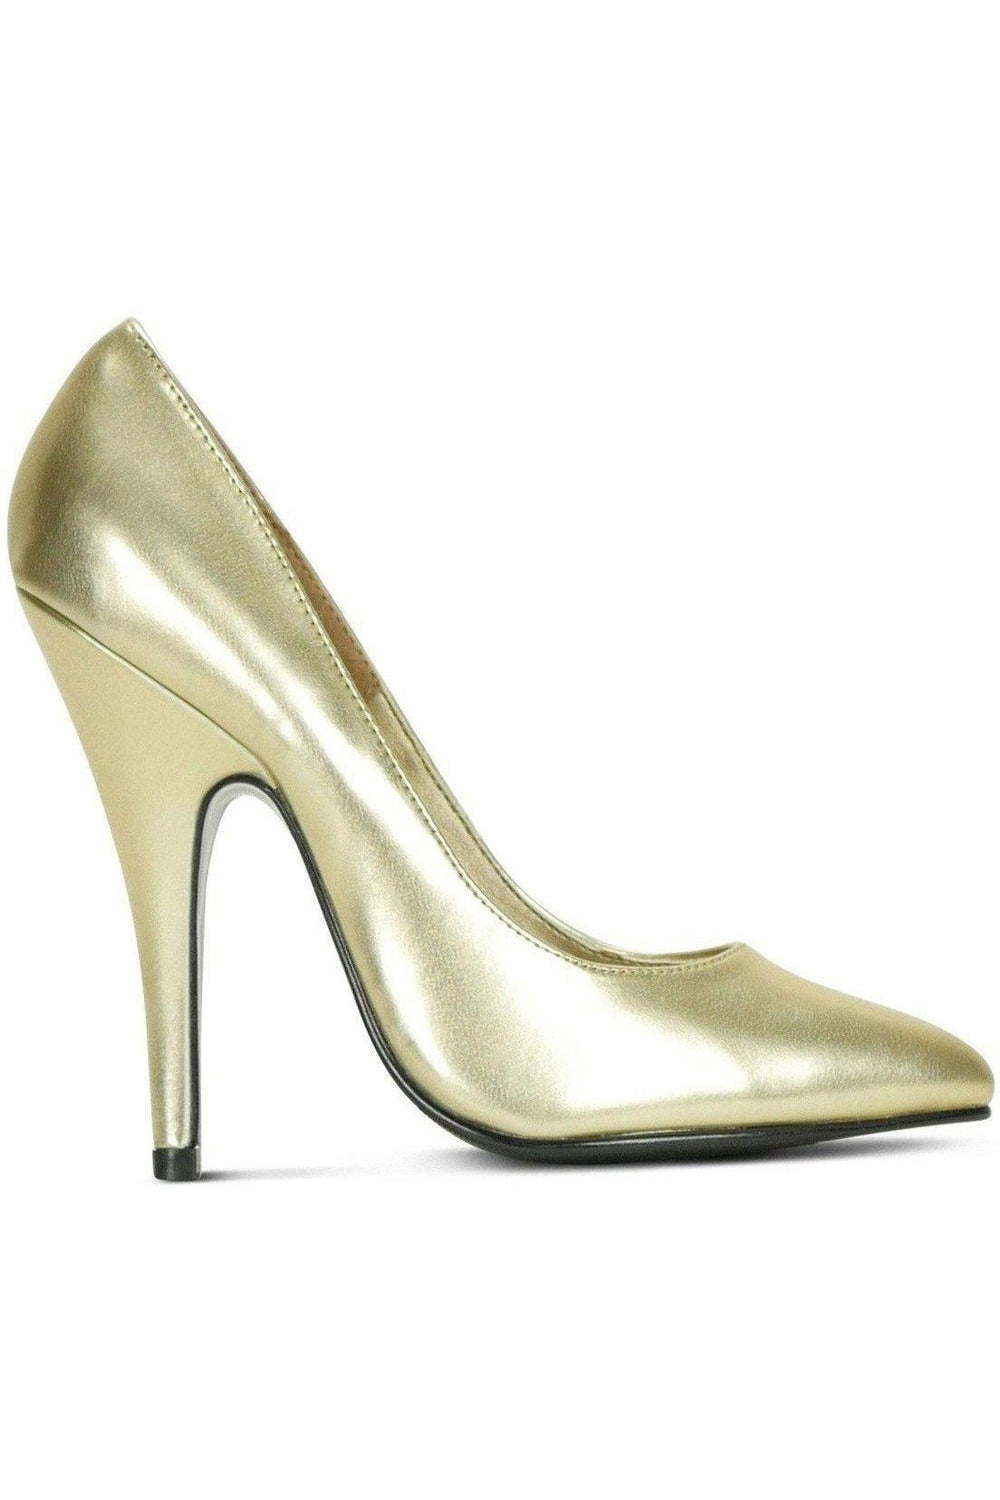 Sexy-4211 Vintage High Heel Pump | Gold Metallic-Sexyshoes Brand-Pumps-SEXYSHOES.COM